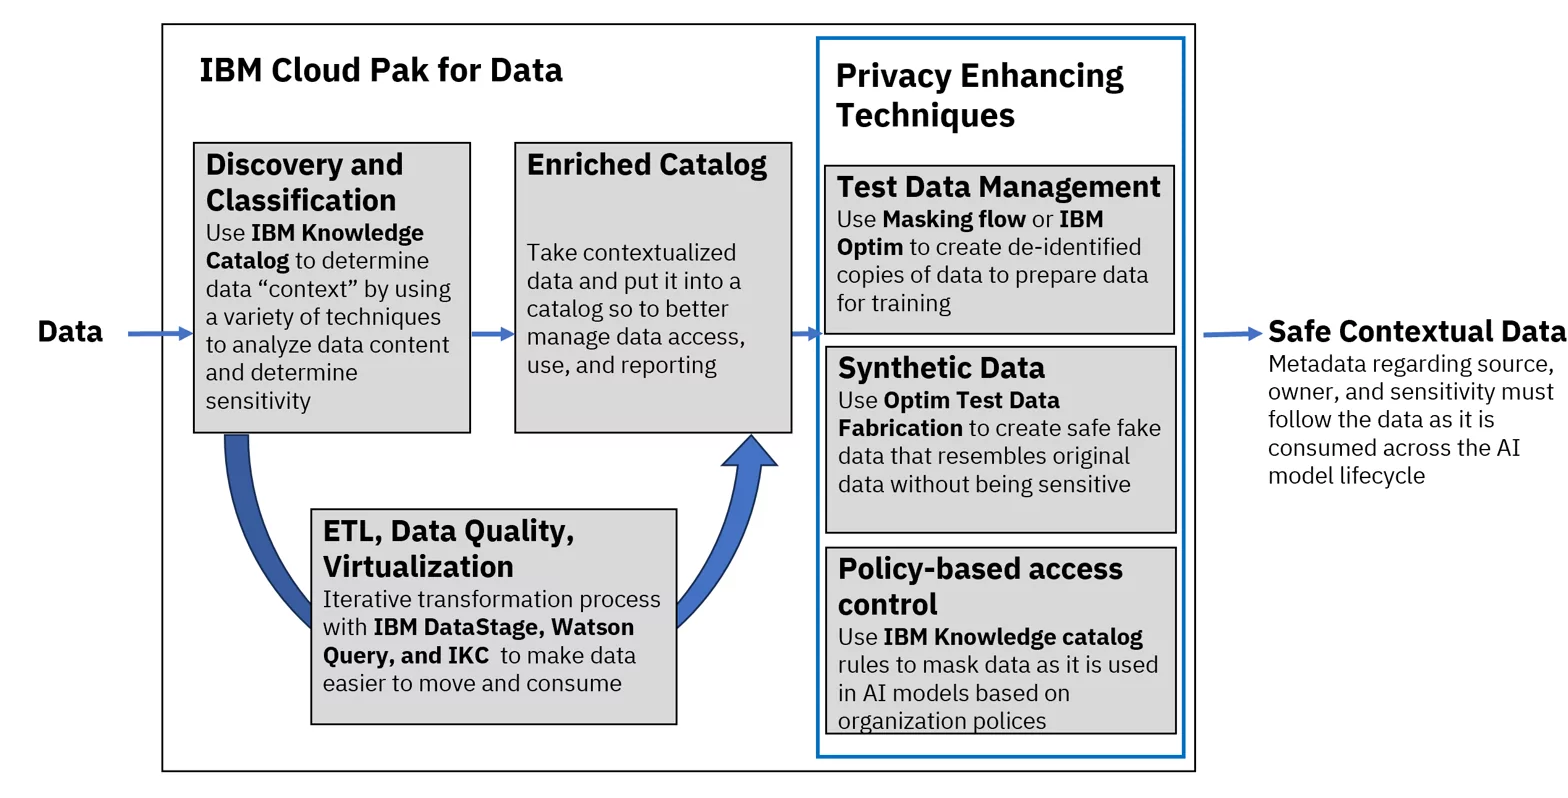 LLM app stack and data governance solution in context